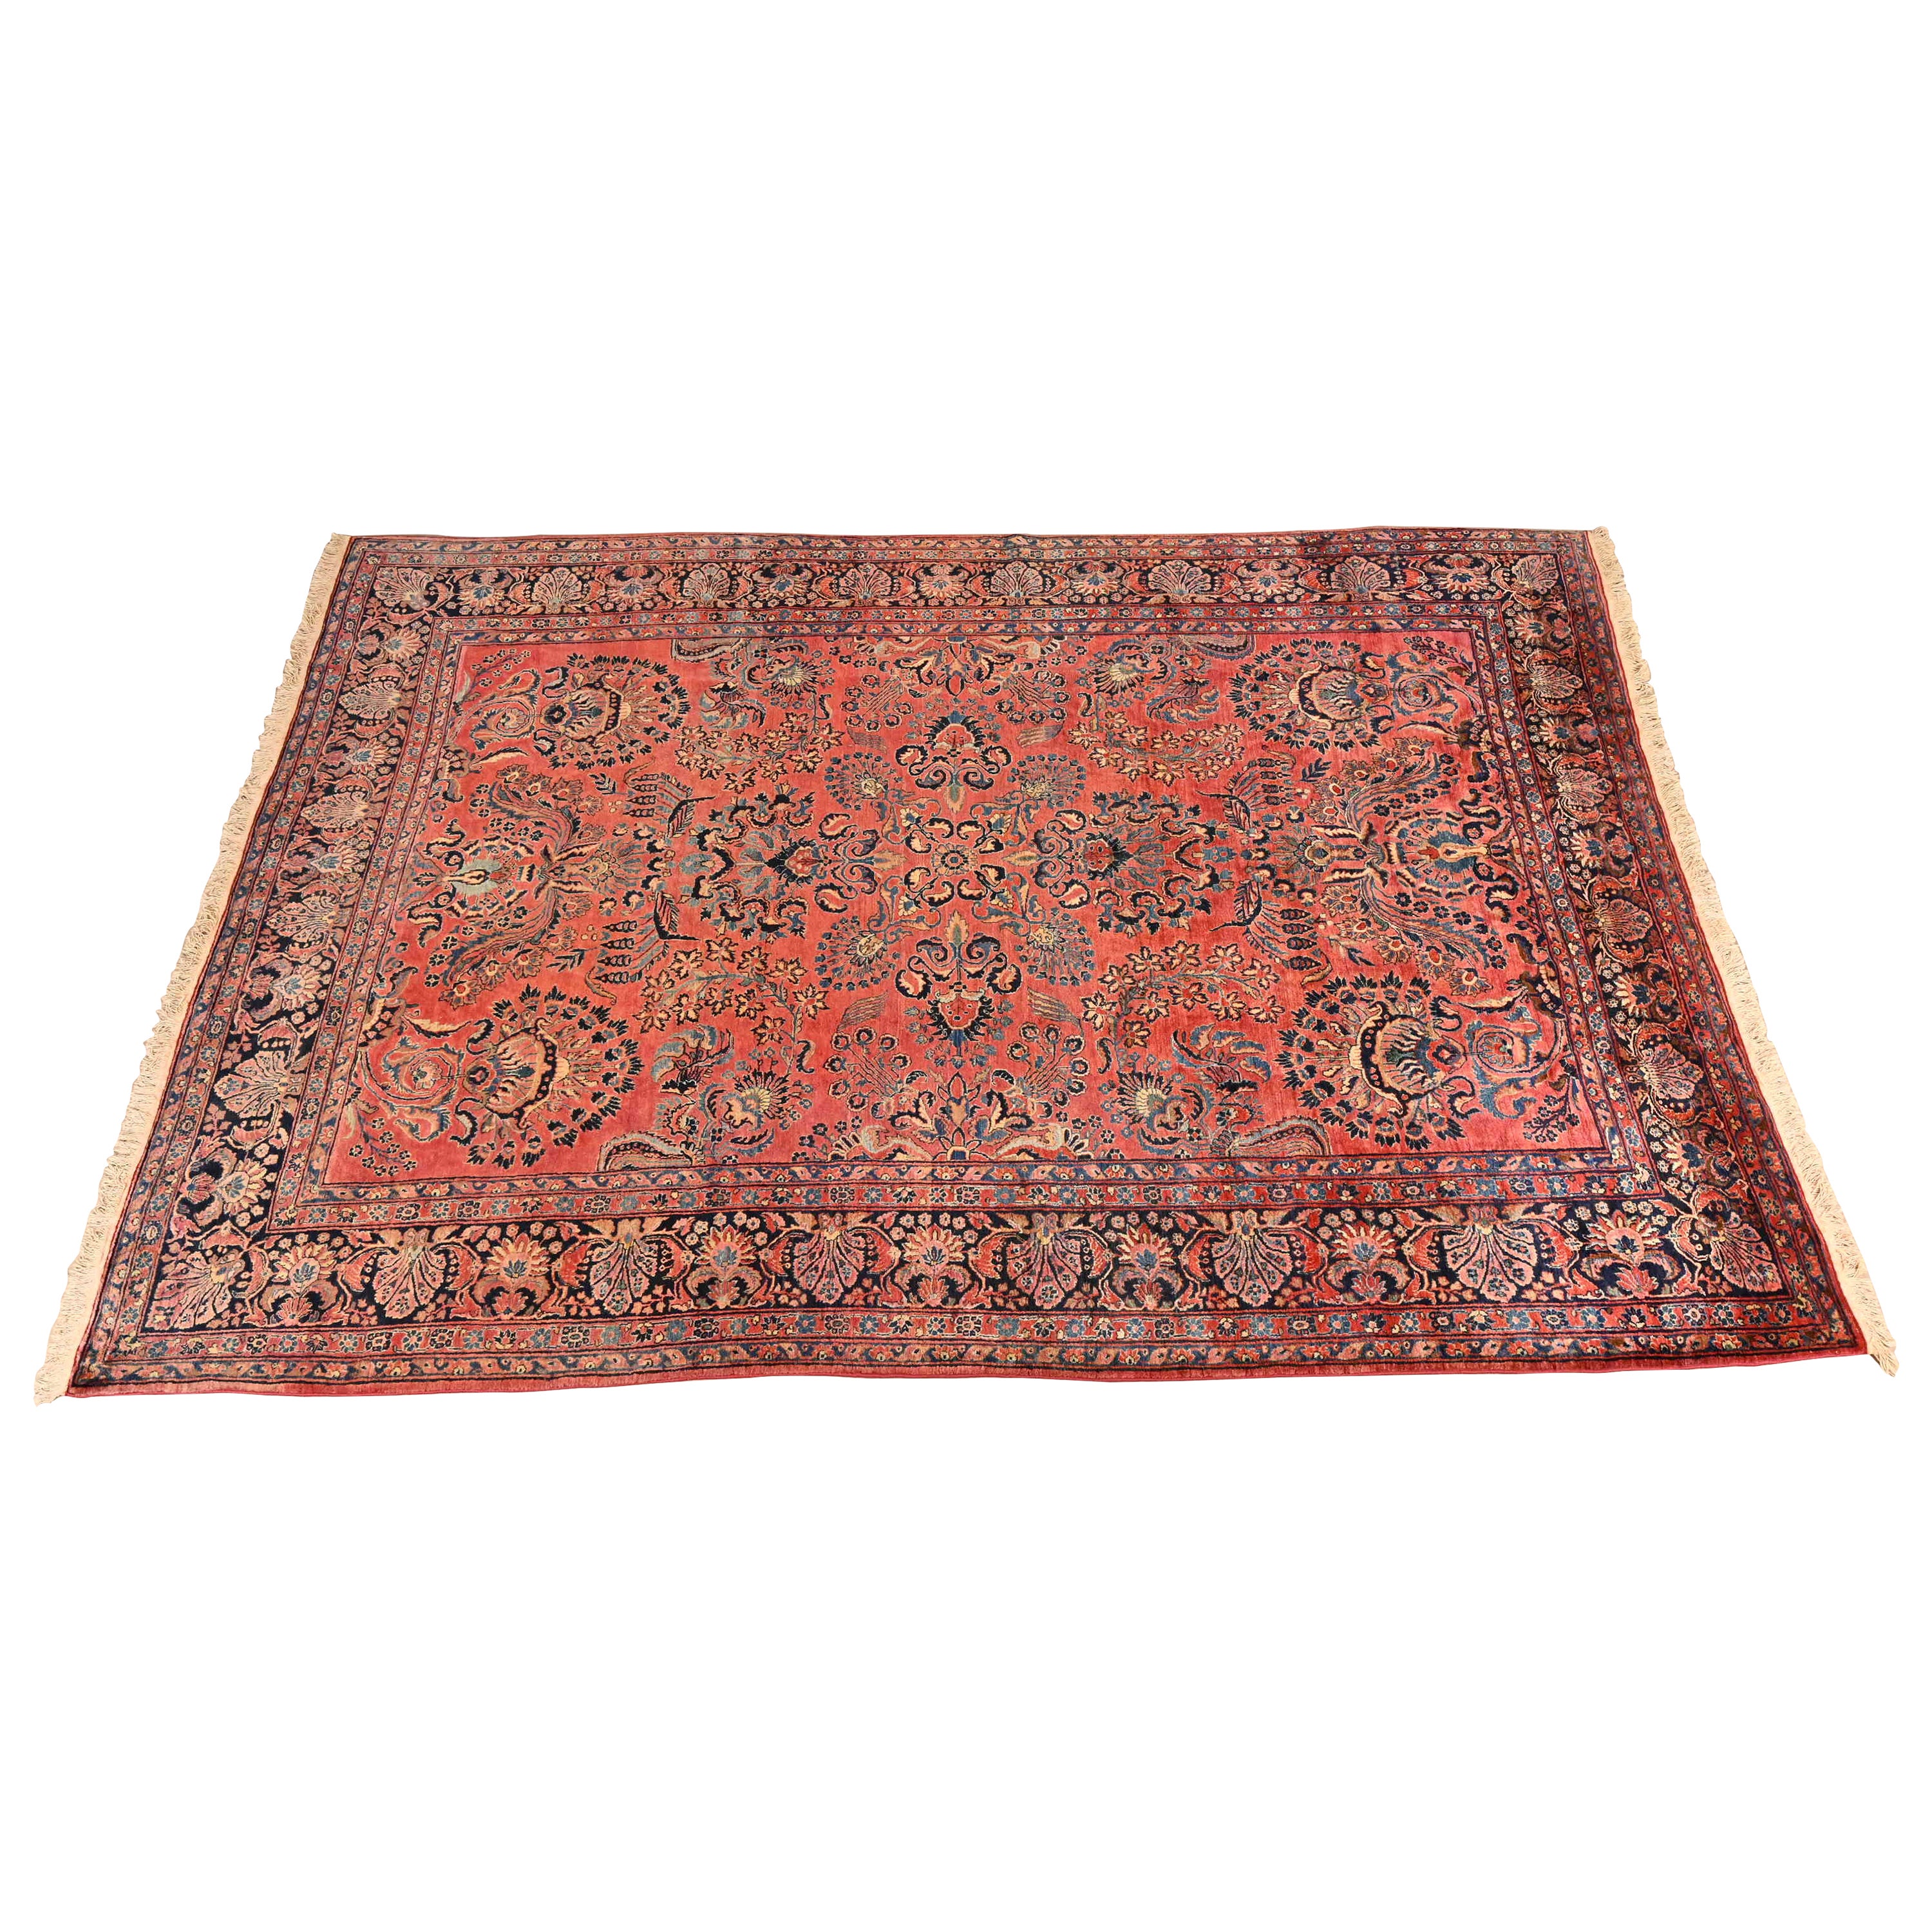 Antique Hand-Knotted Persian Sarouk Room Size Rug, Circa 1930s For Sale